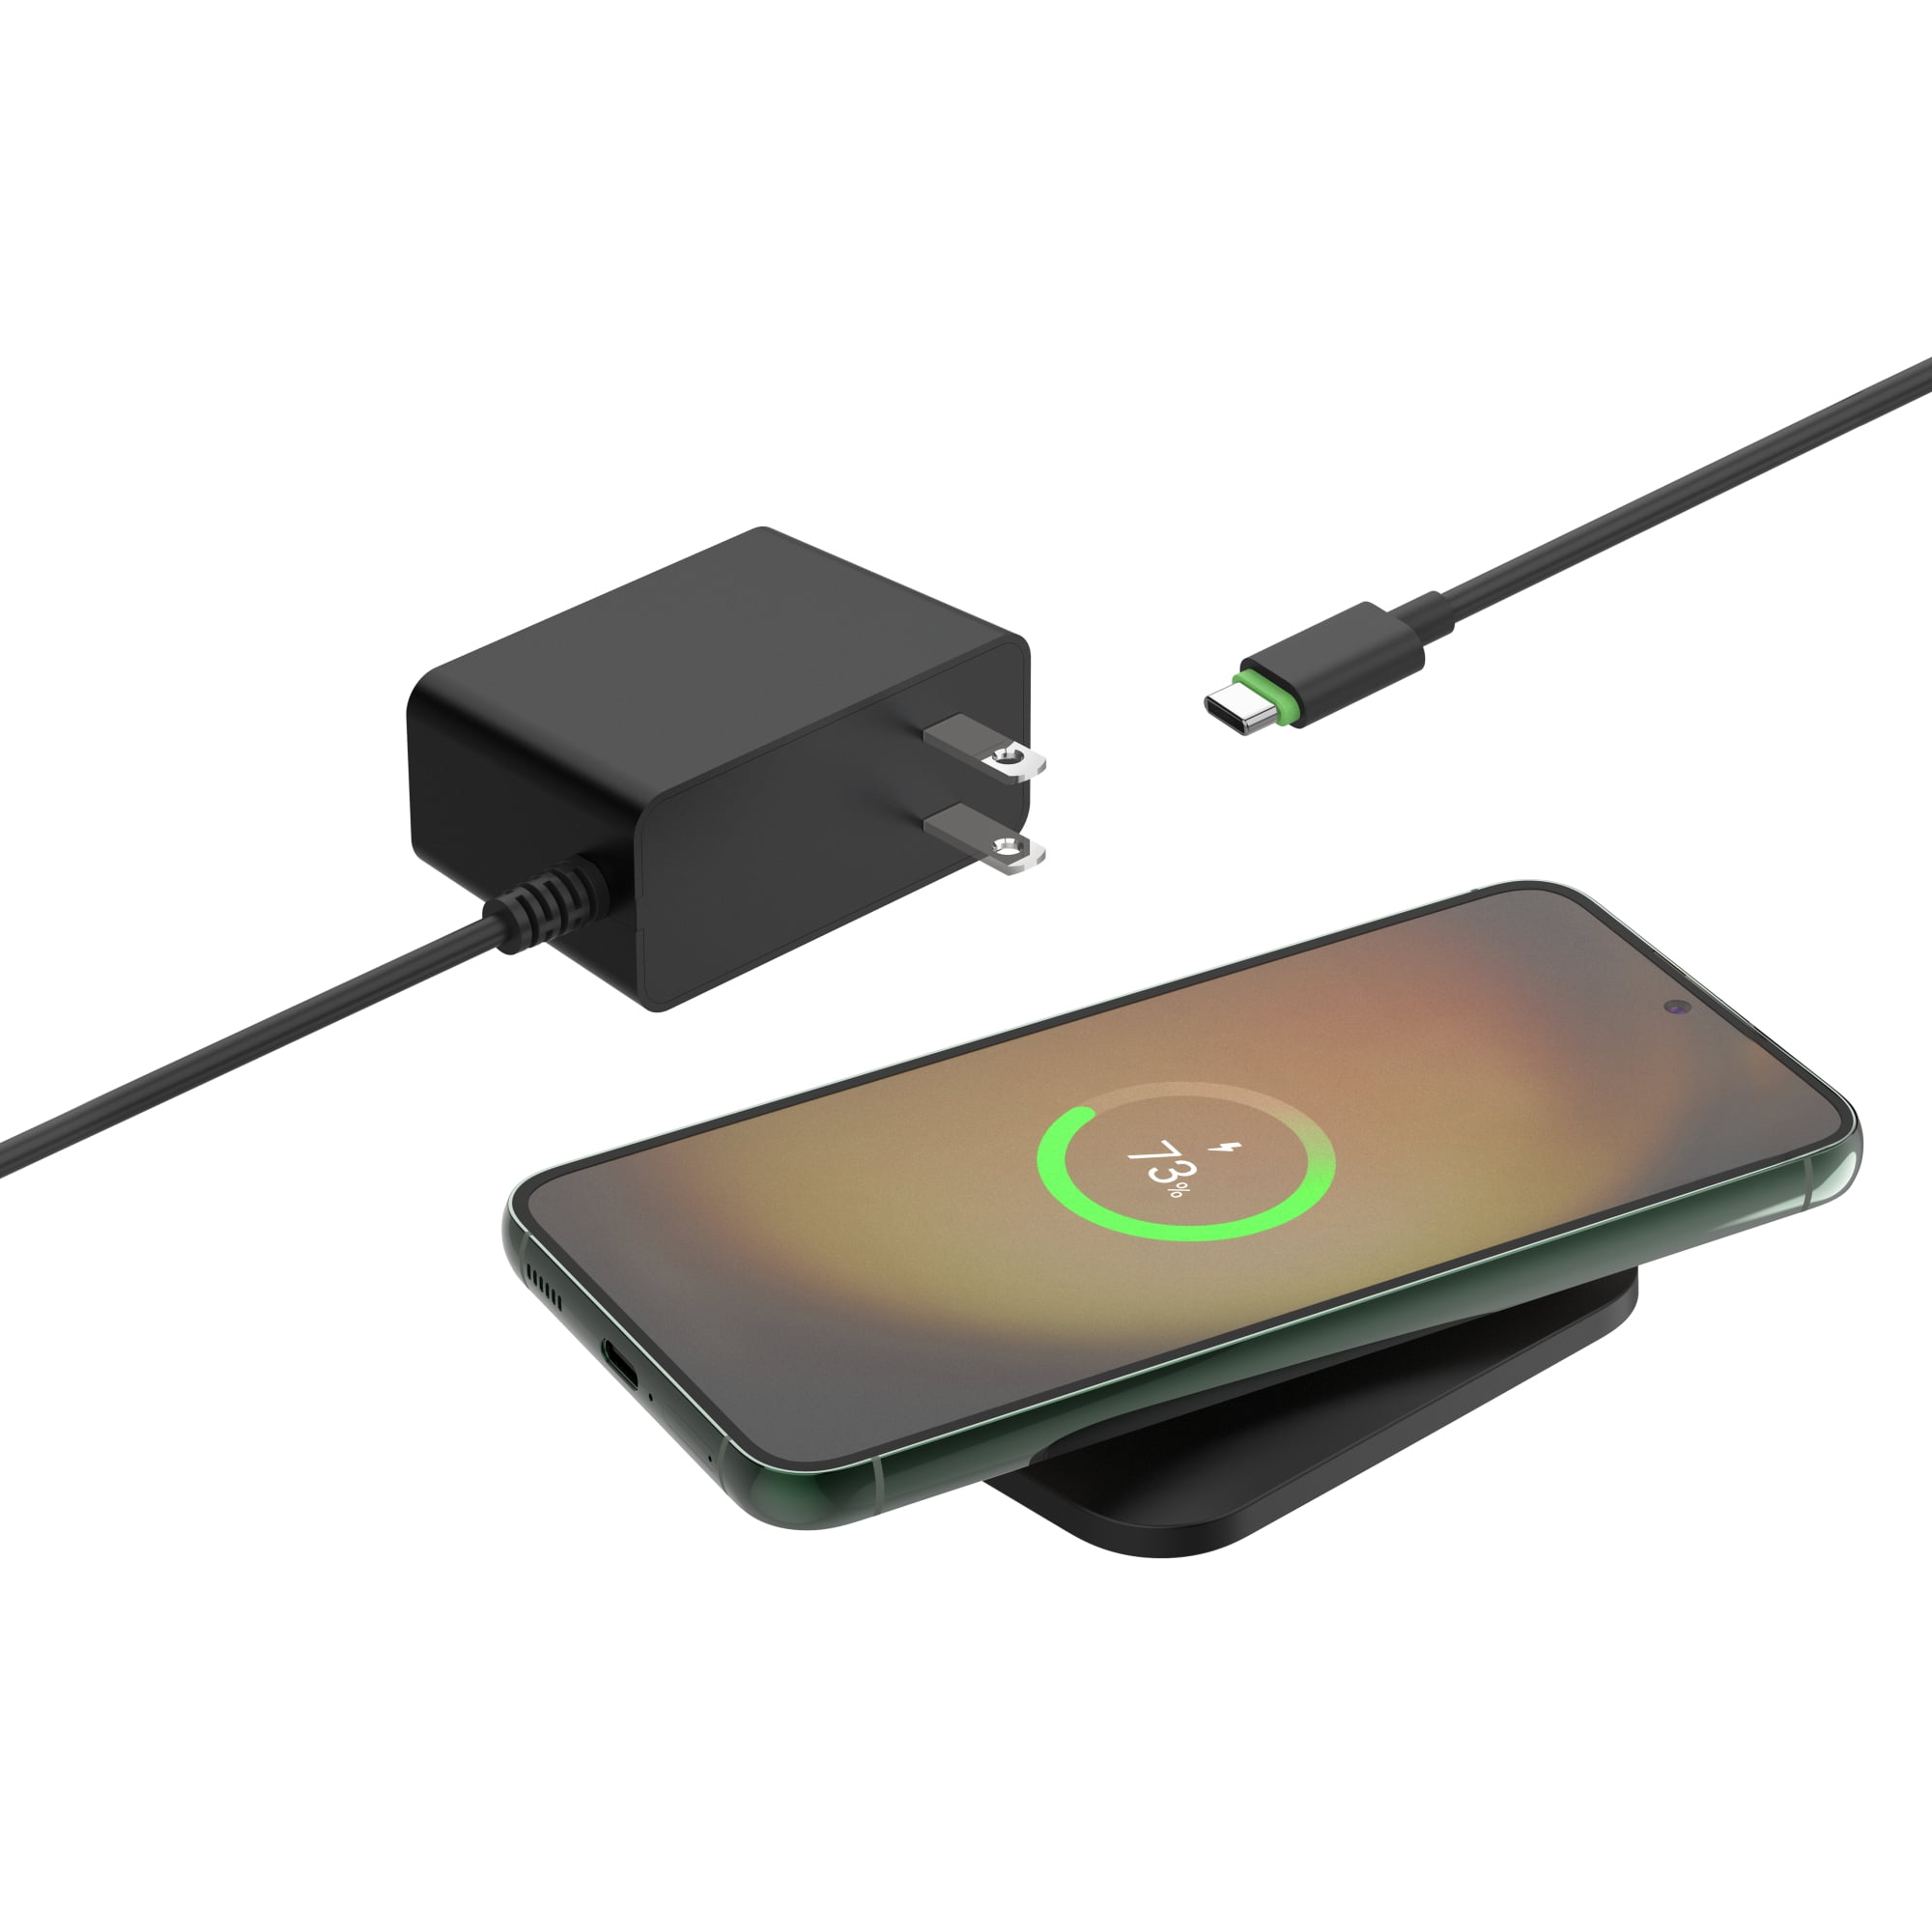 Belkin 7.5W Magnetic Portable Wireless Charger Pad - 6.6ft Cable - MagSafe  Compatible - Power Supply Included - Black